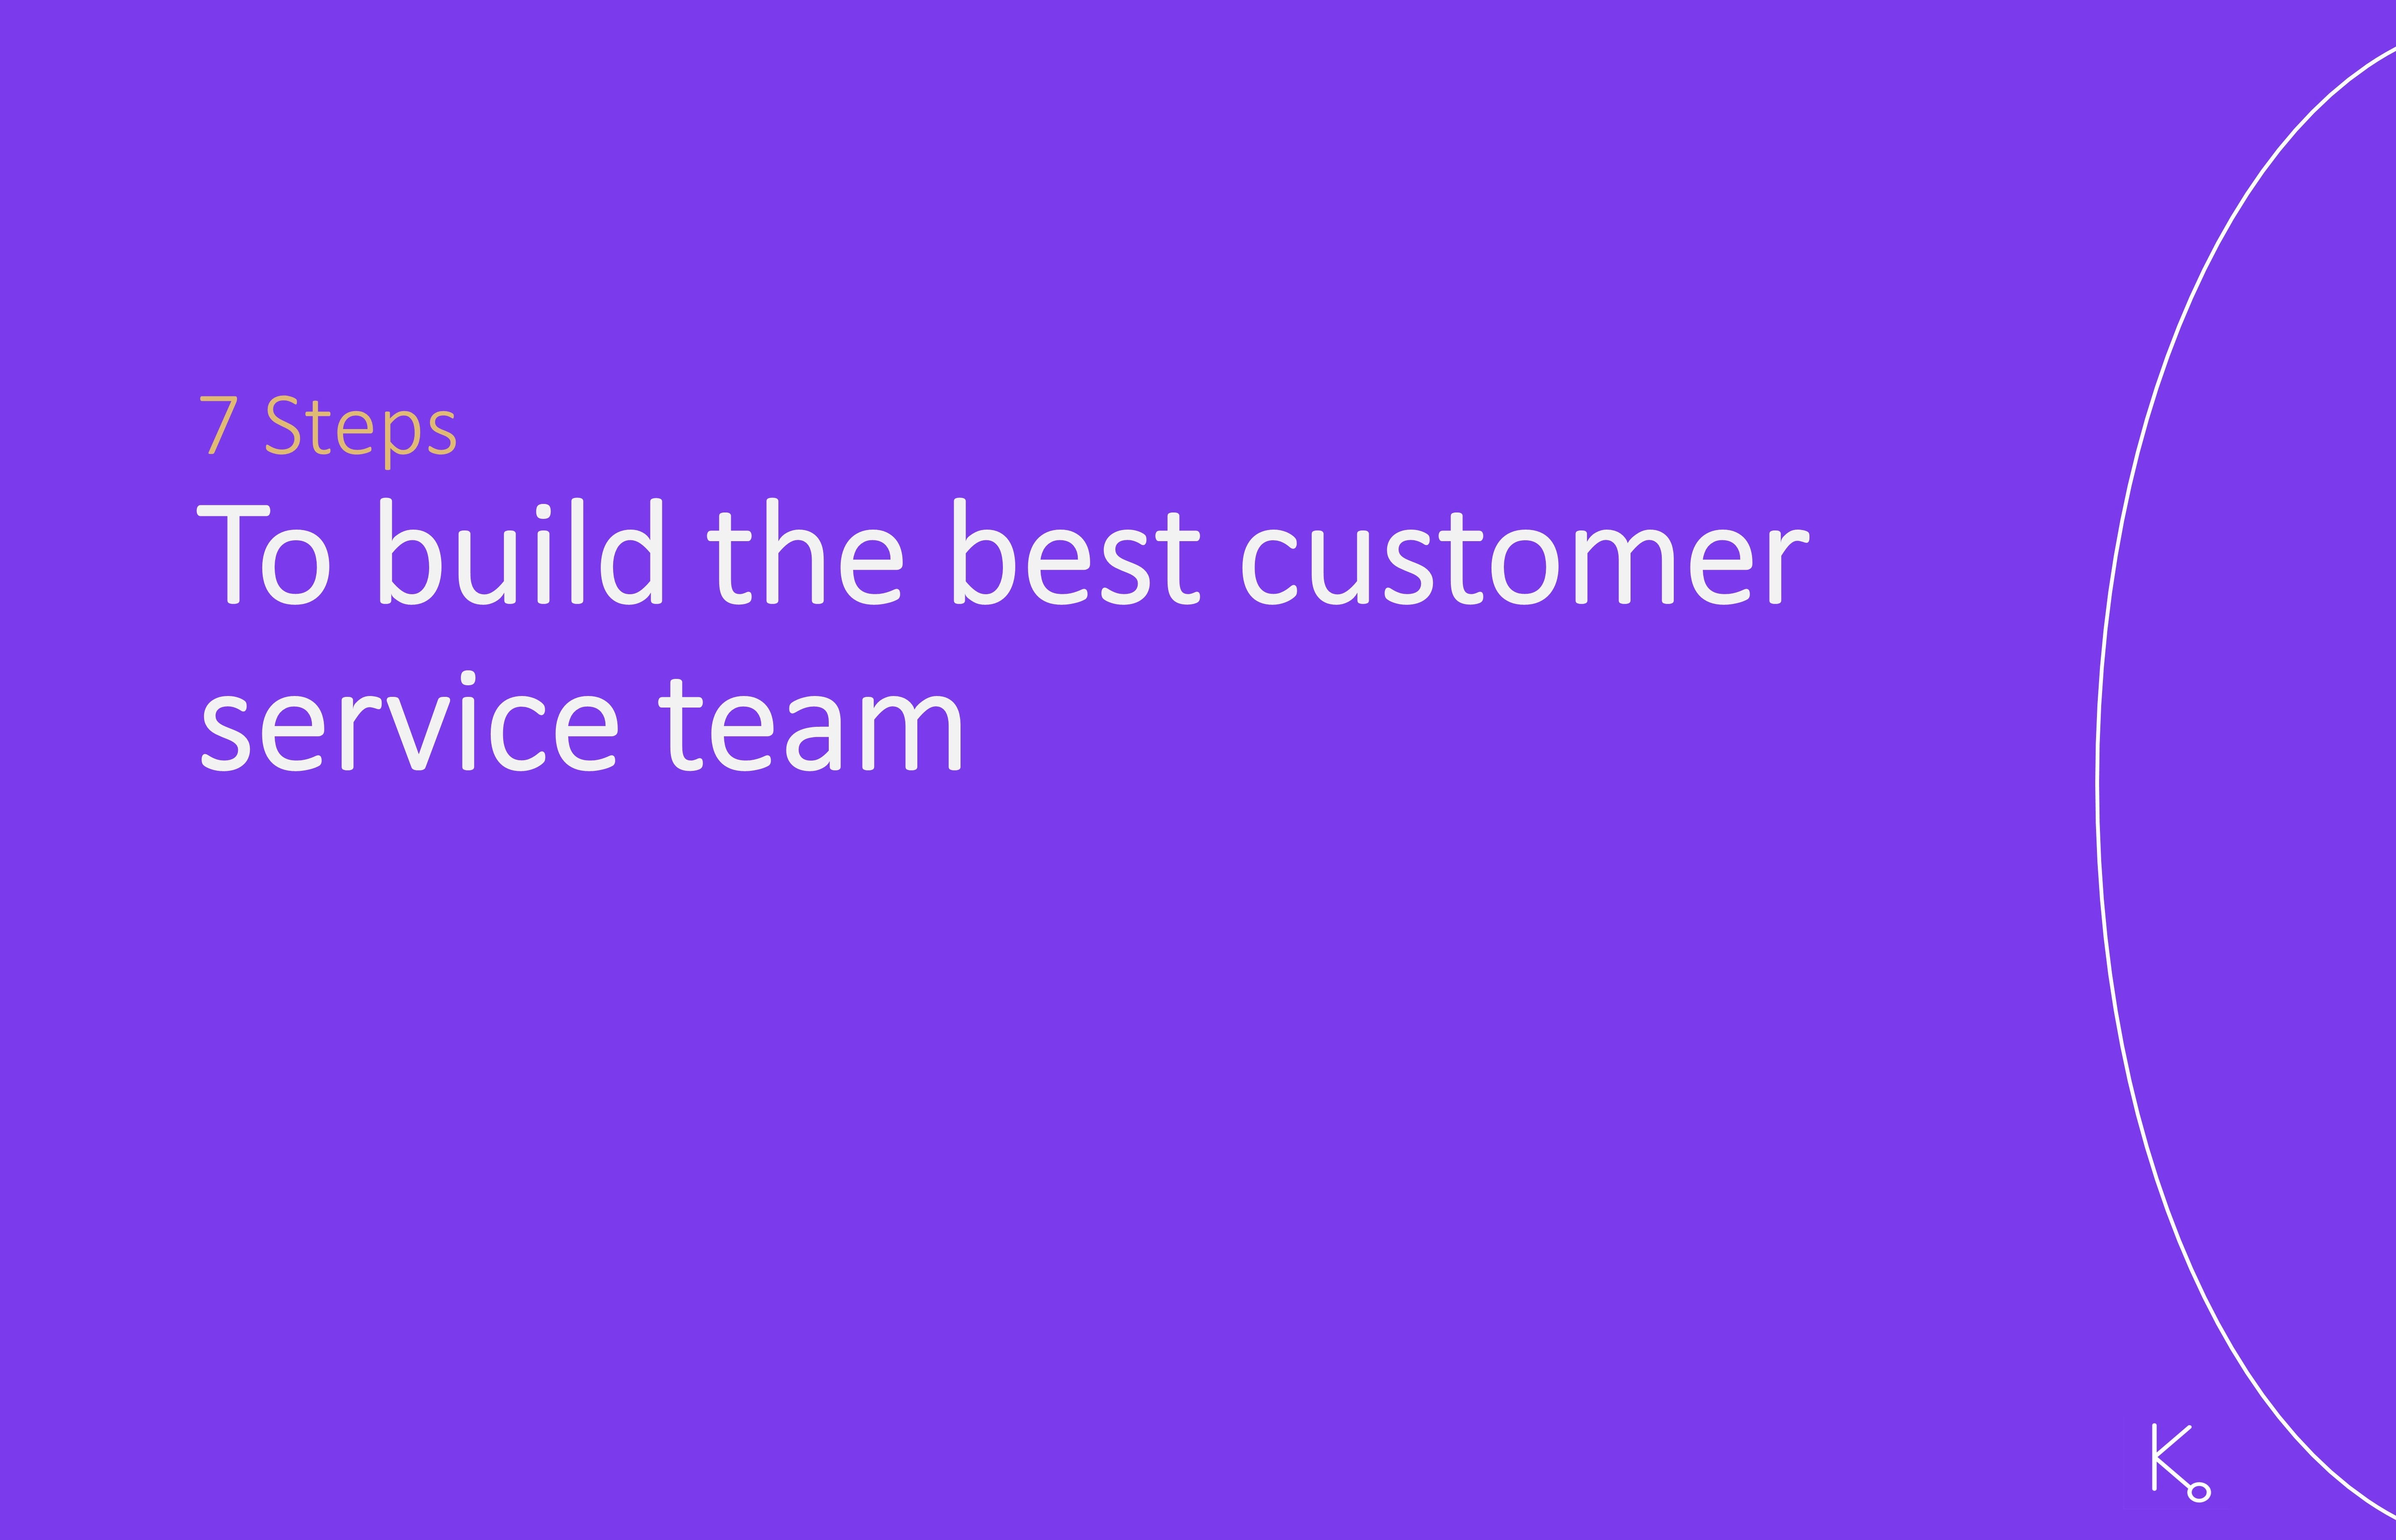 7 steps to build the best customer service team